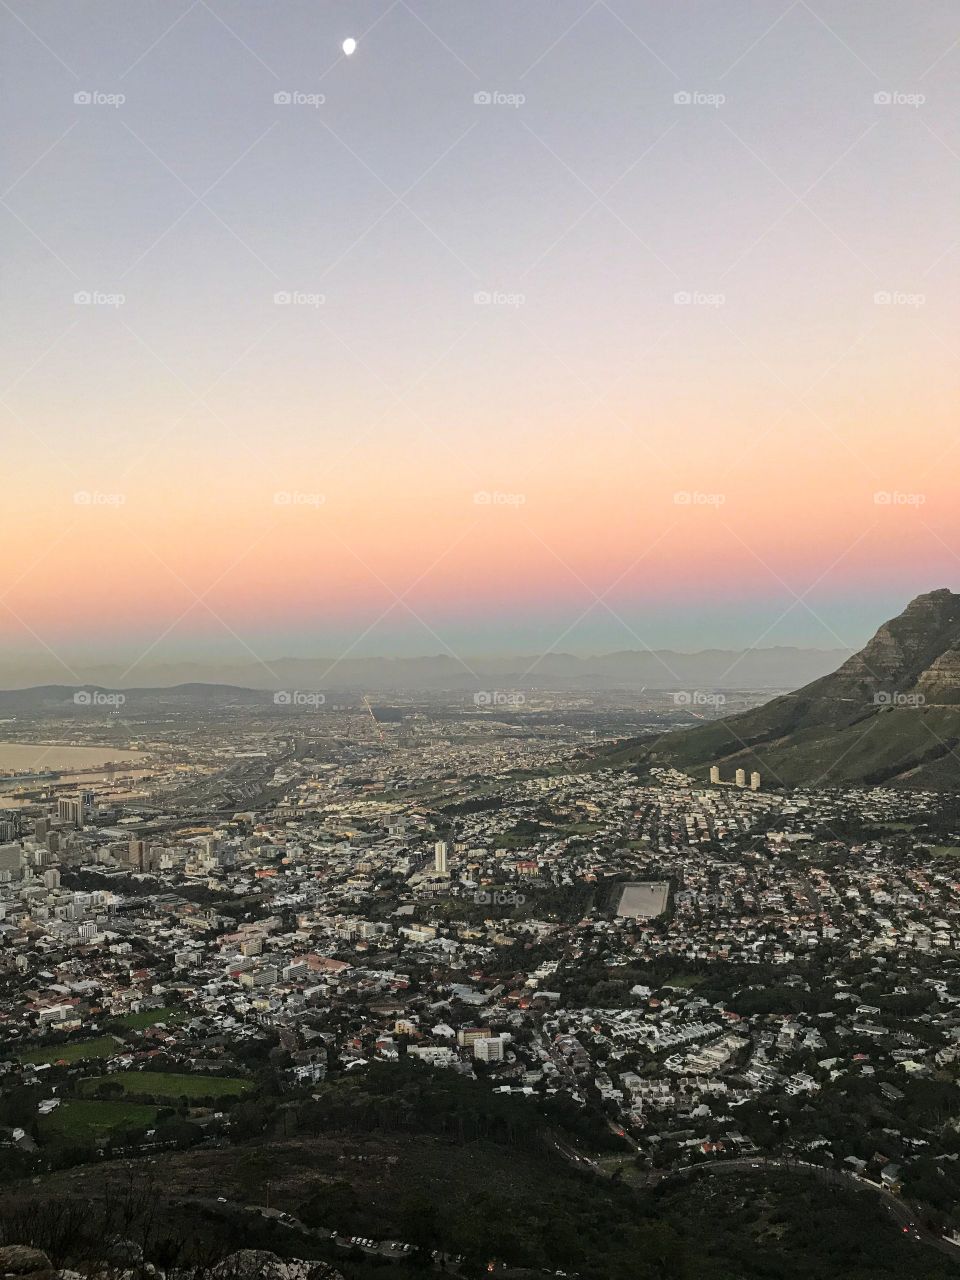 This photo captured on Lion’s Head Mountain in Cape Town, South Africa during my hiking.The sky is becoming pink and blue before the beautiful orange sunset. Nature is beautiful!